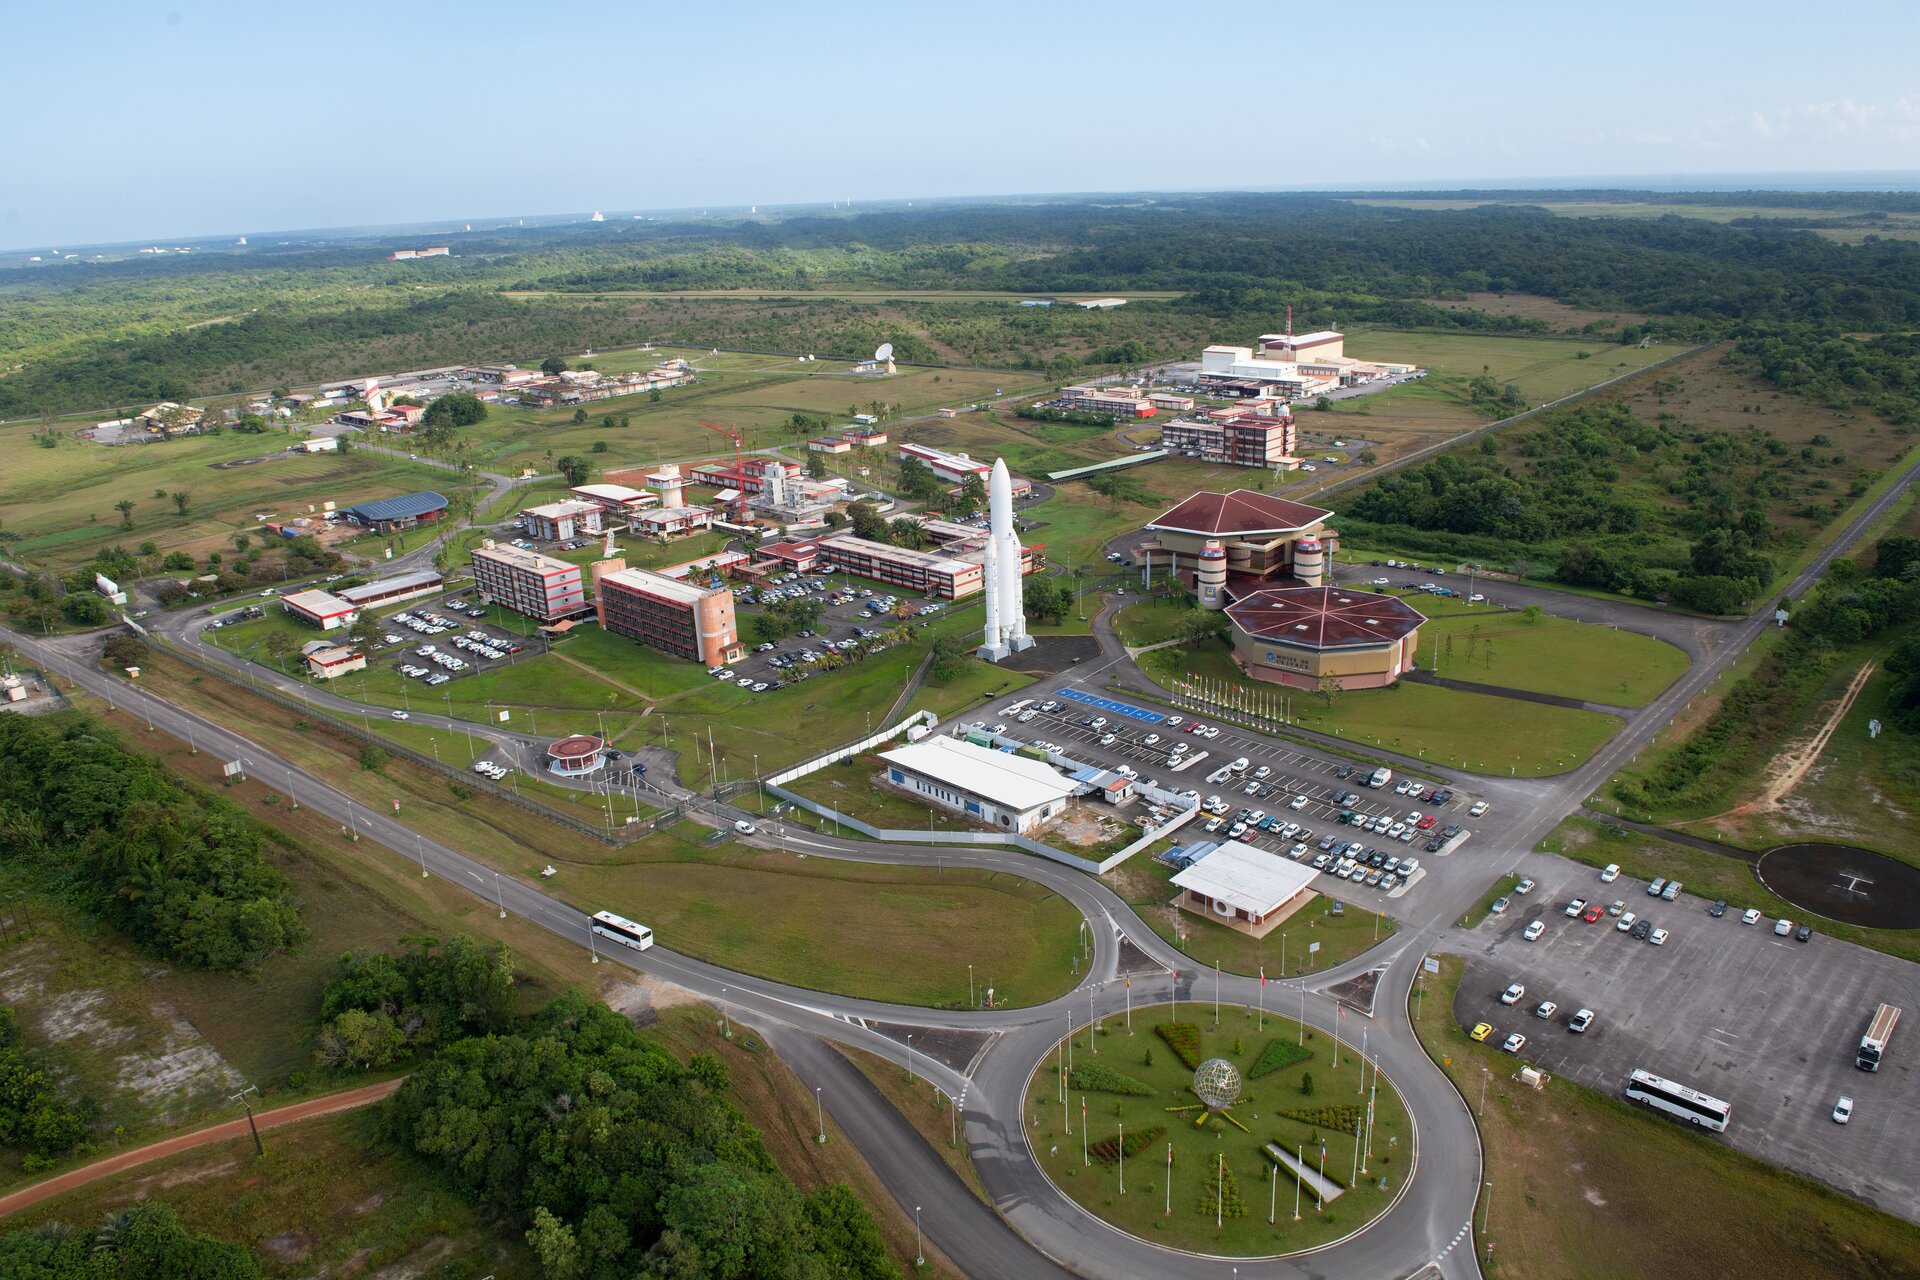 Overview of the Technical Centre at Europe's Spaceport in Kourou, French Guiana